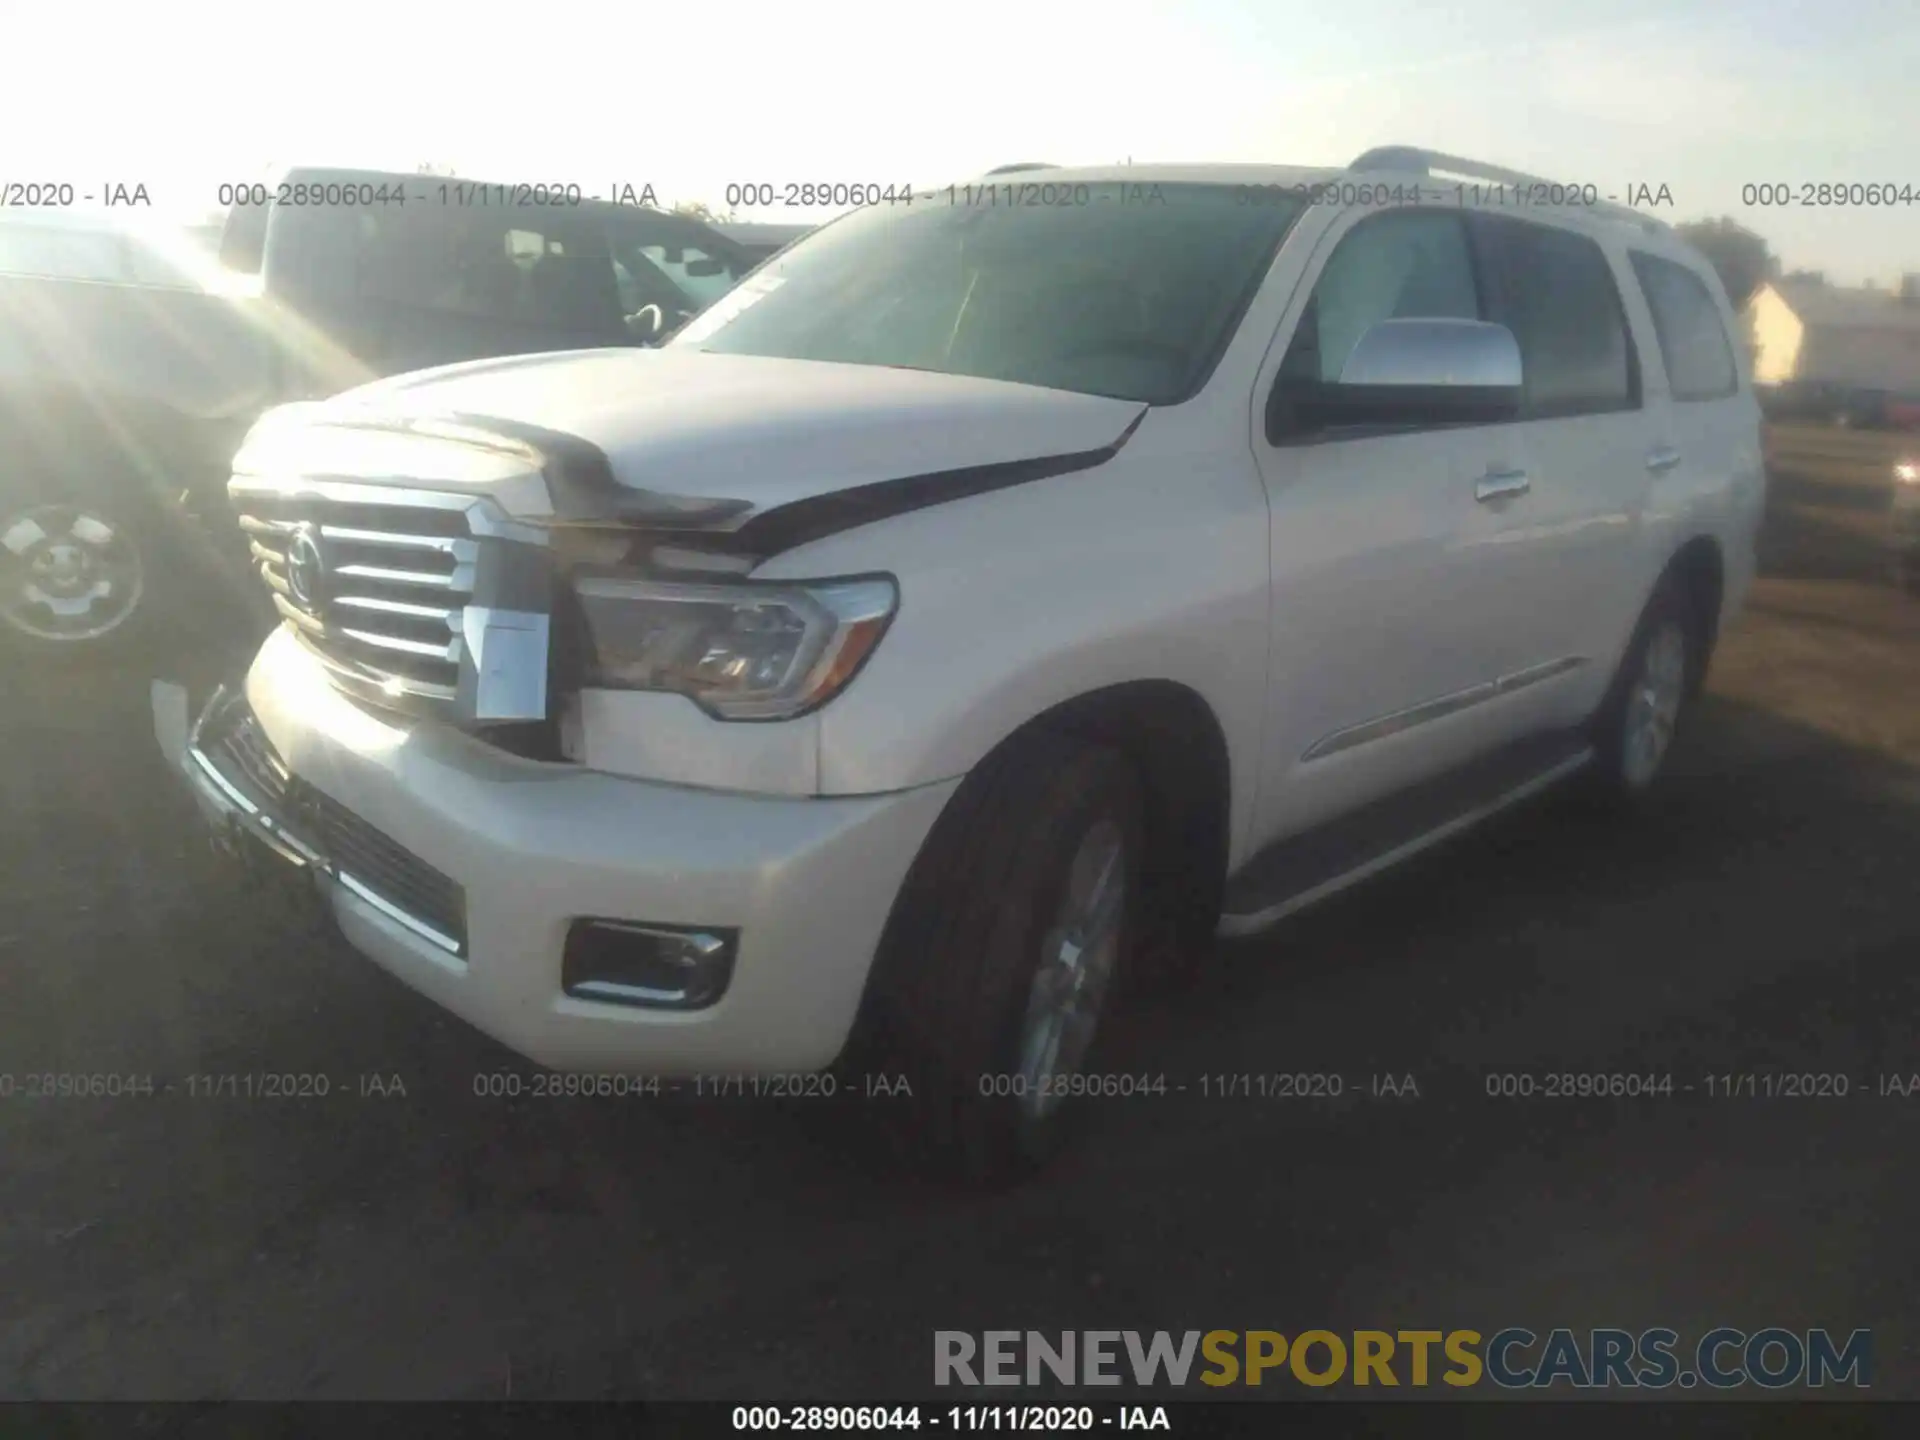 2 Photograph of a damaged car 5TDDY5G16KS165346 TOYOTA SEQUOIA 2019